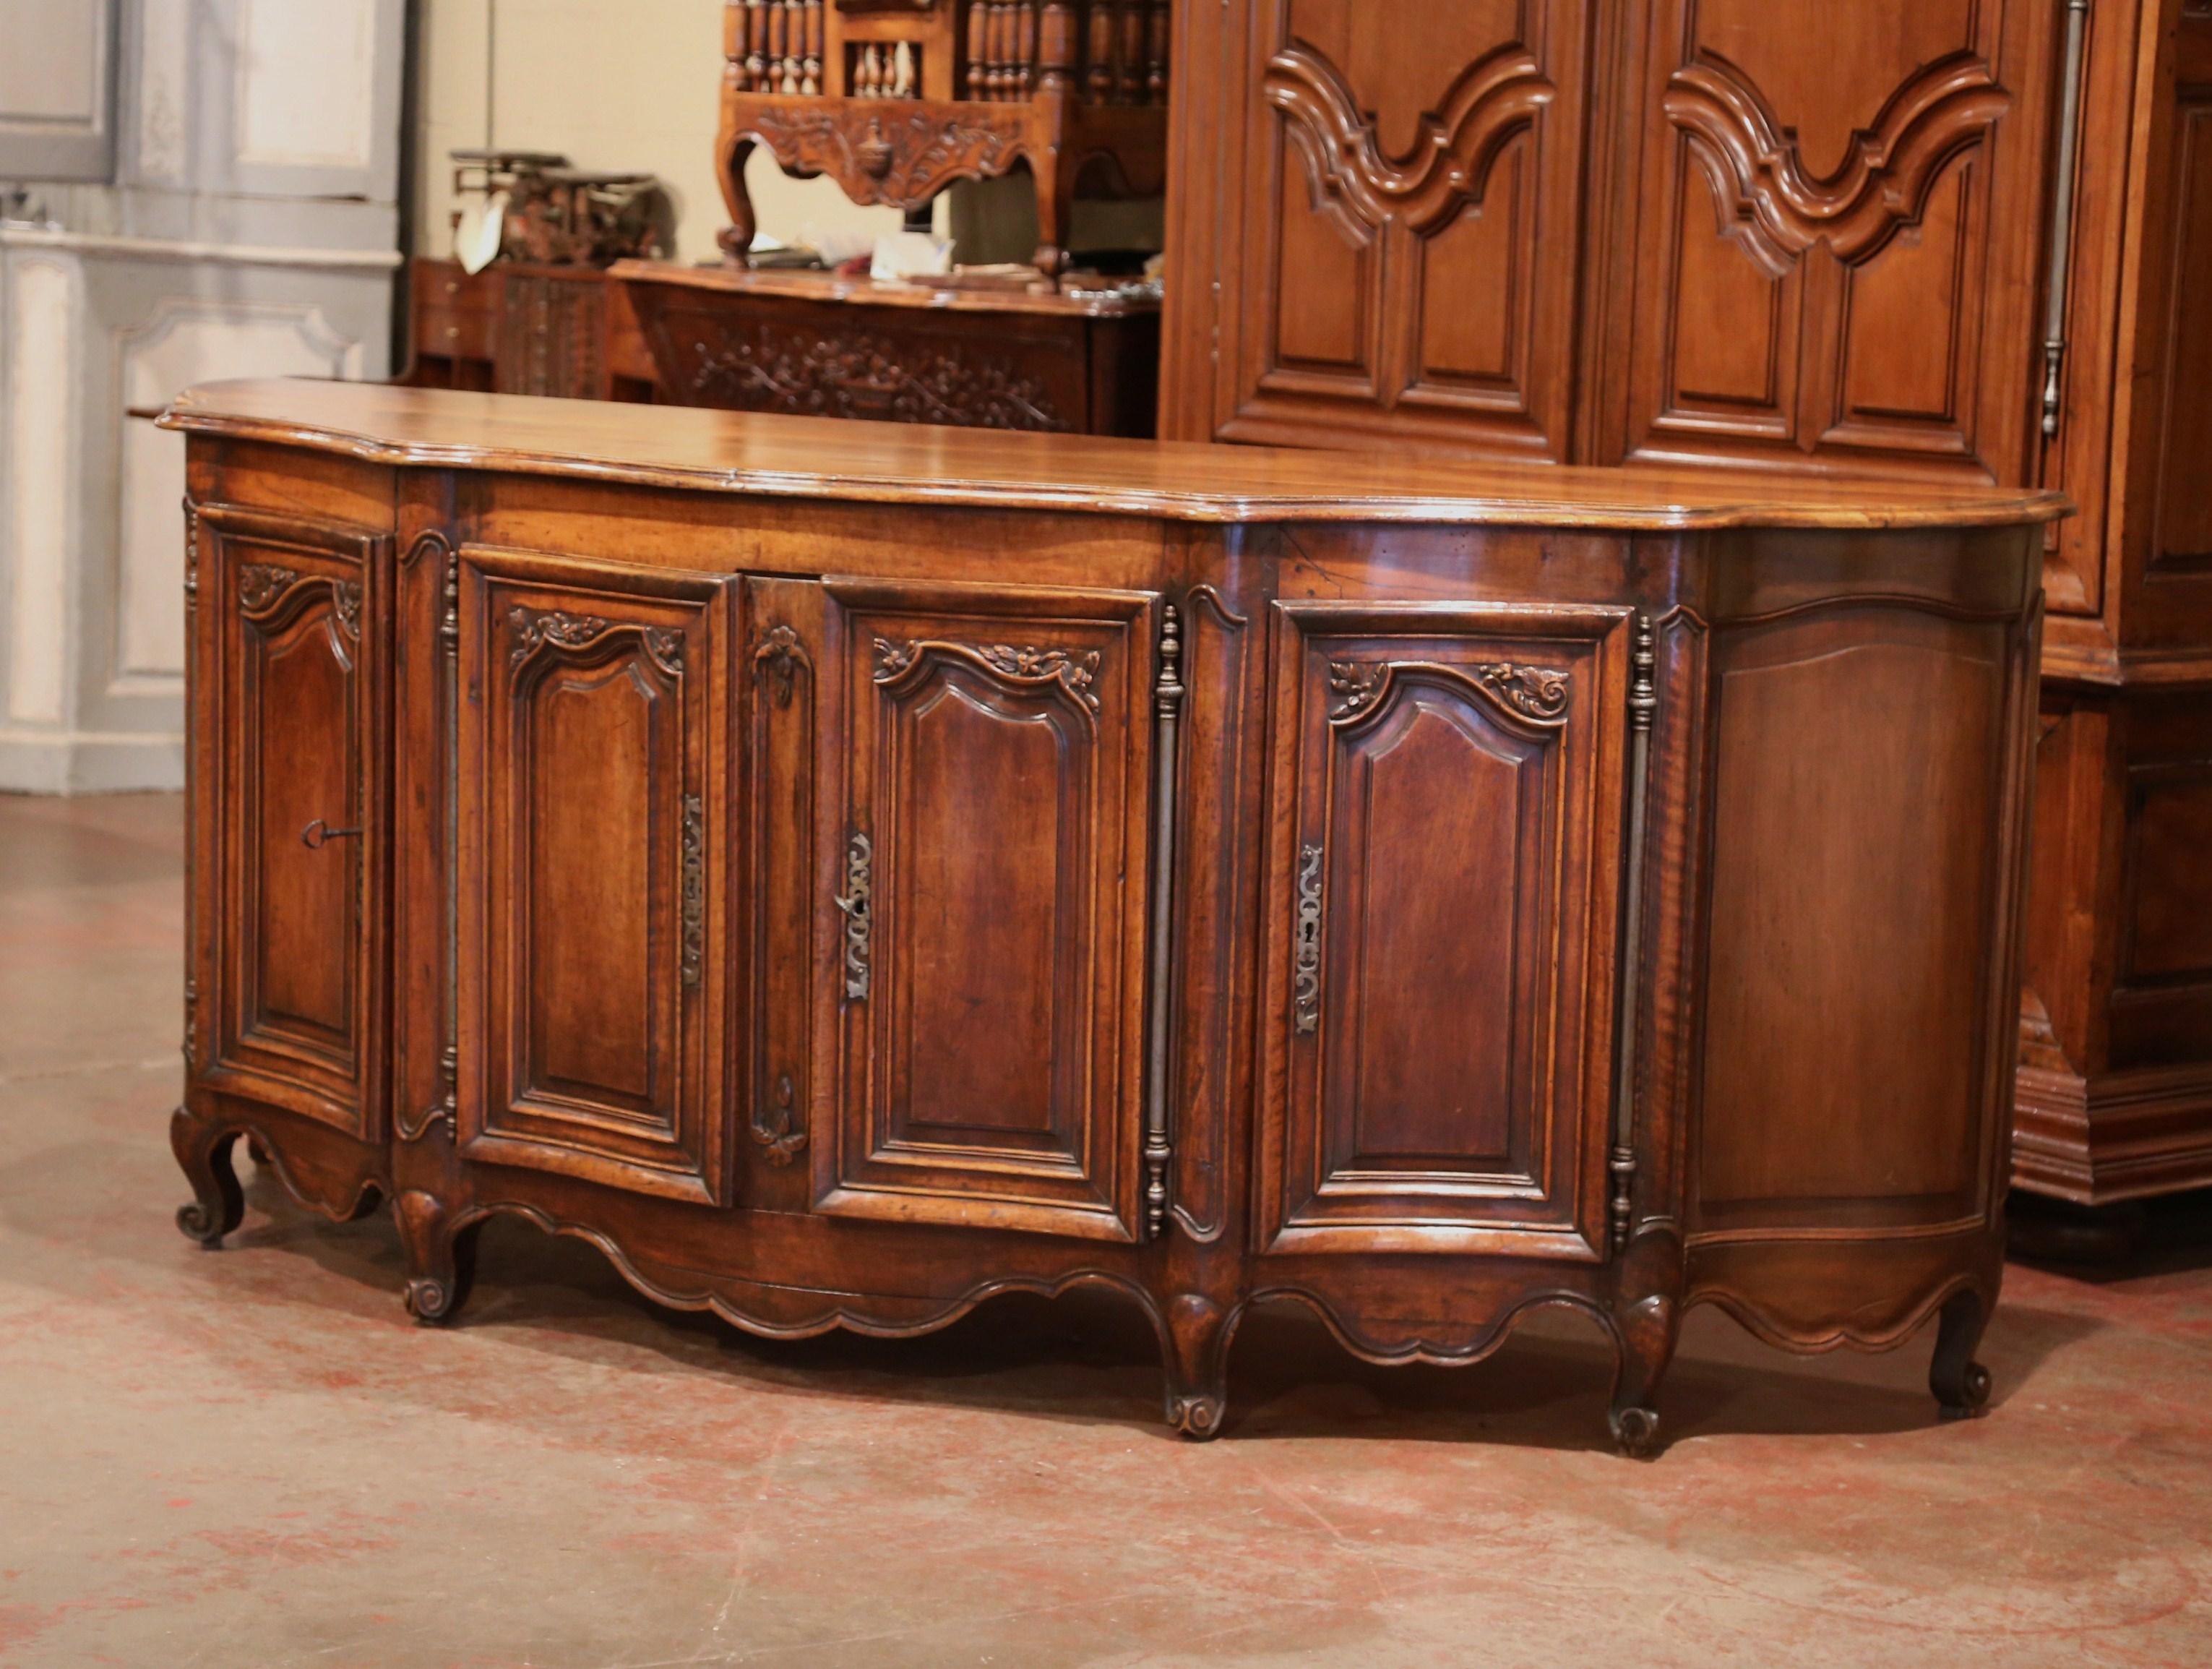 Patinated 18th Century French Louis XV Carved Walnut Four-Door Serpentine Buffet Enfilade